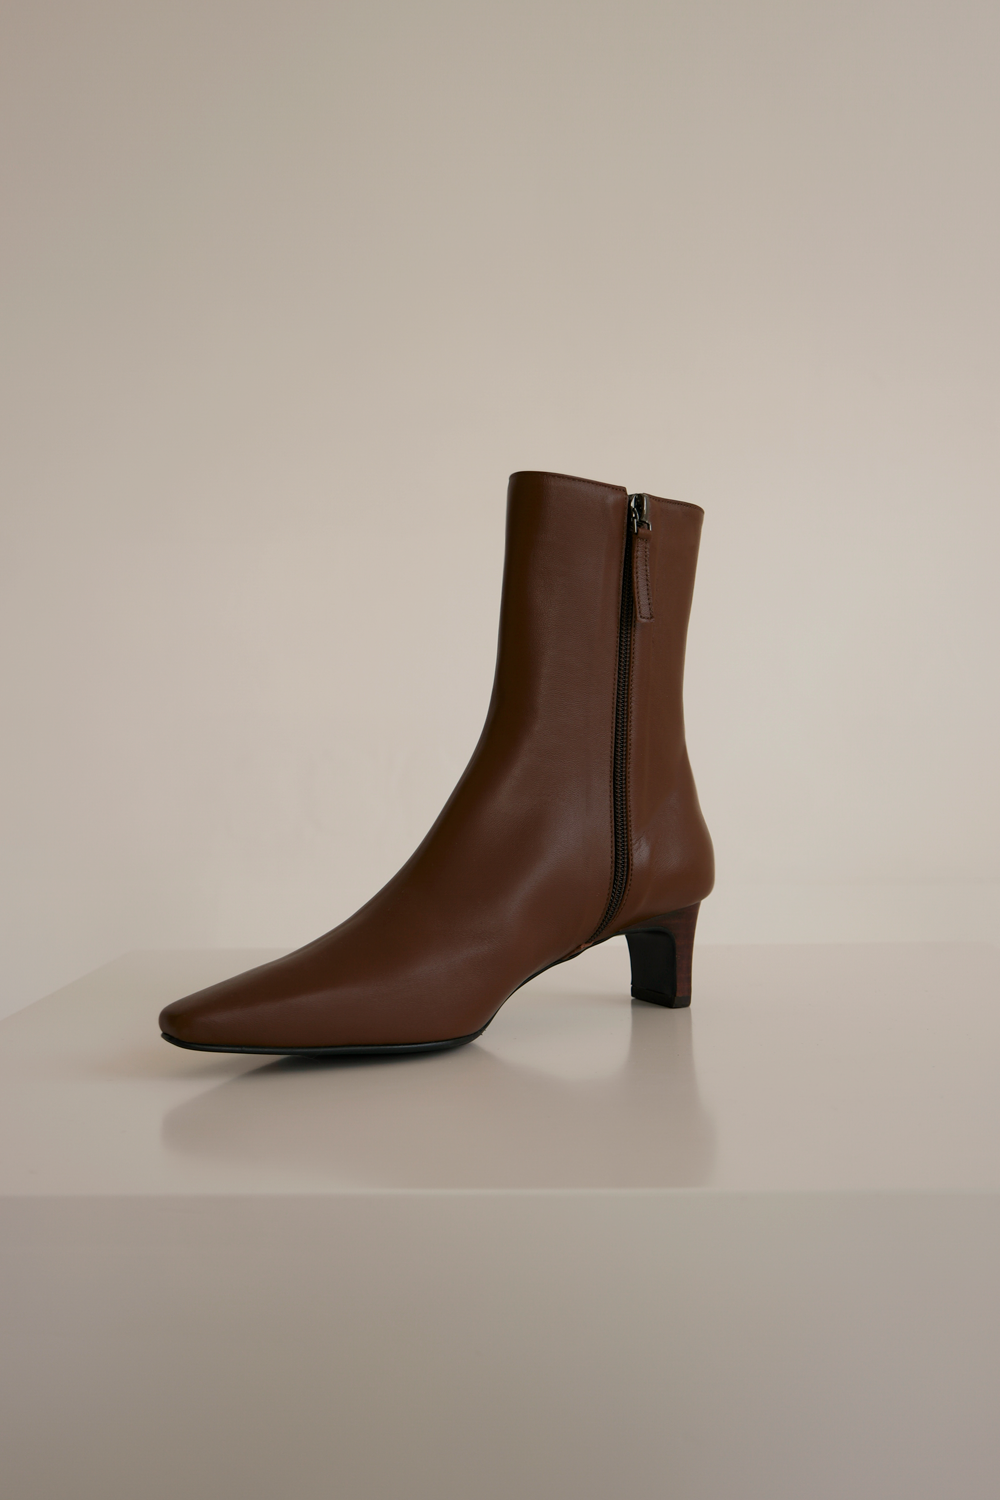 ANTHÈSE delicate ankle boots, brown